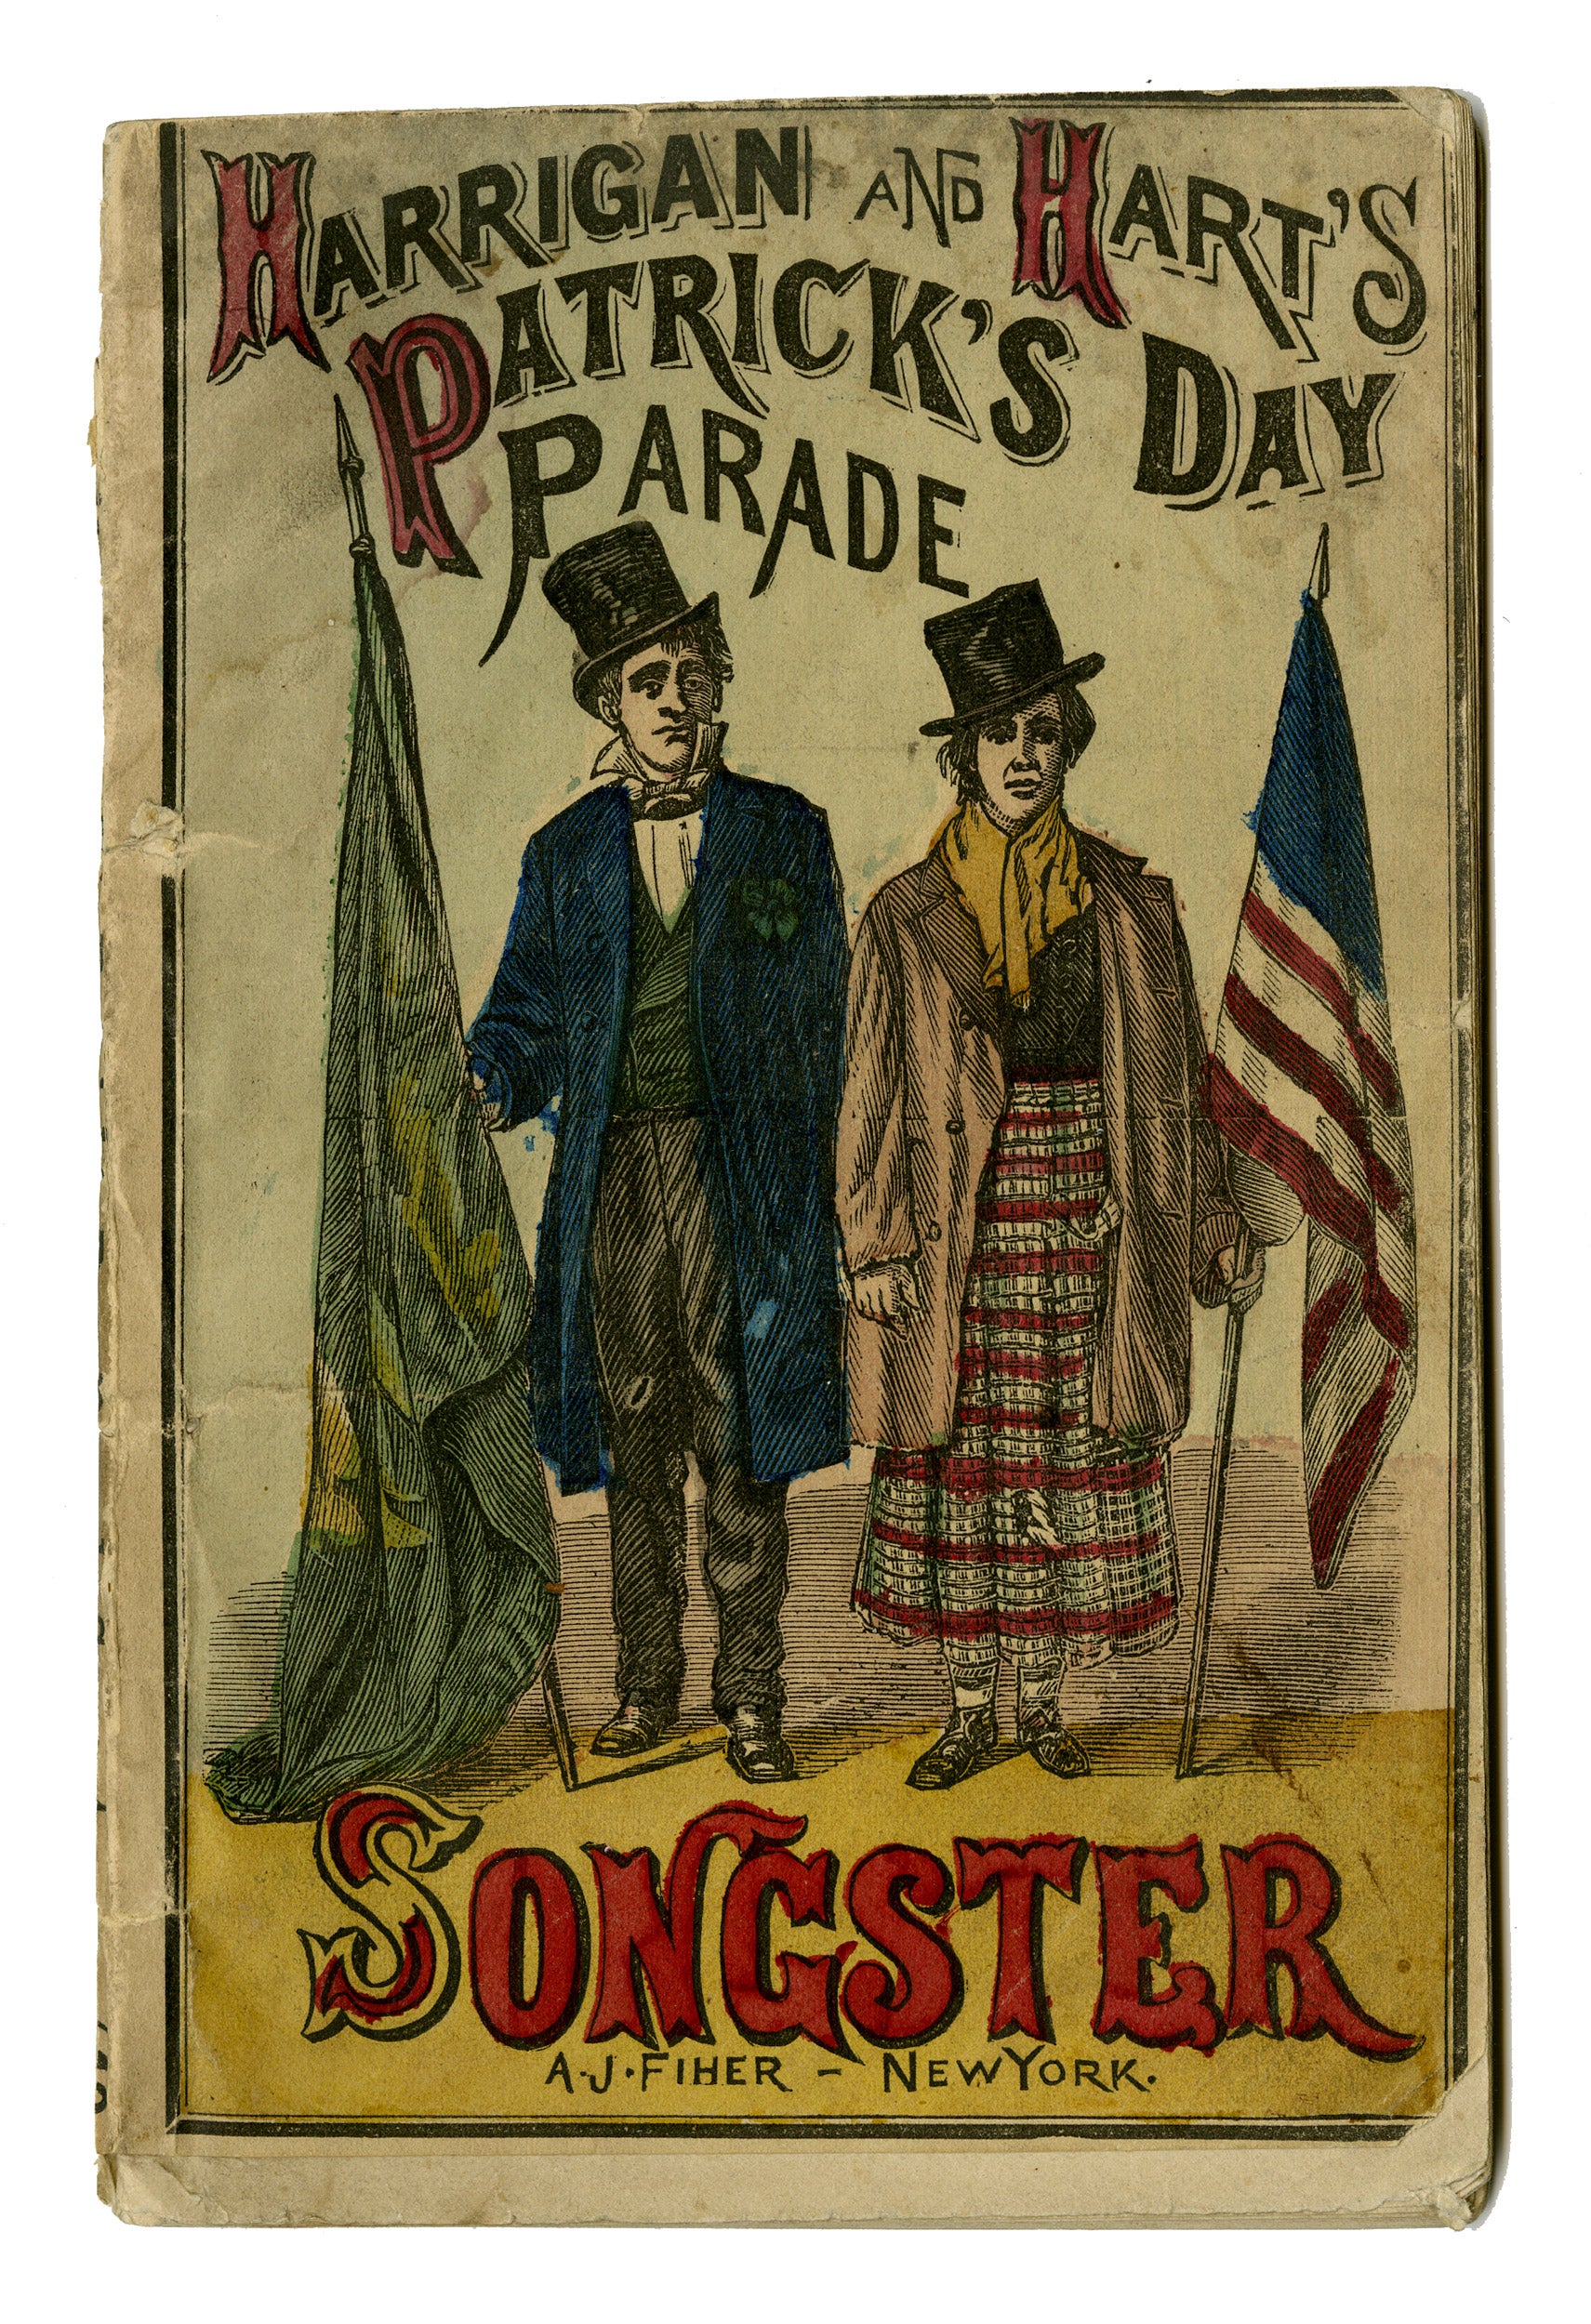 Harrigan and Hart’s Patrick’s Day Parade Songster, 1874;